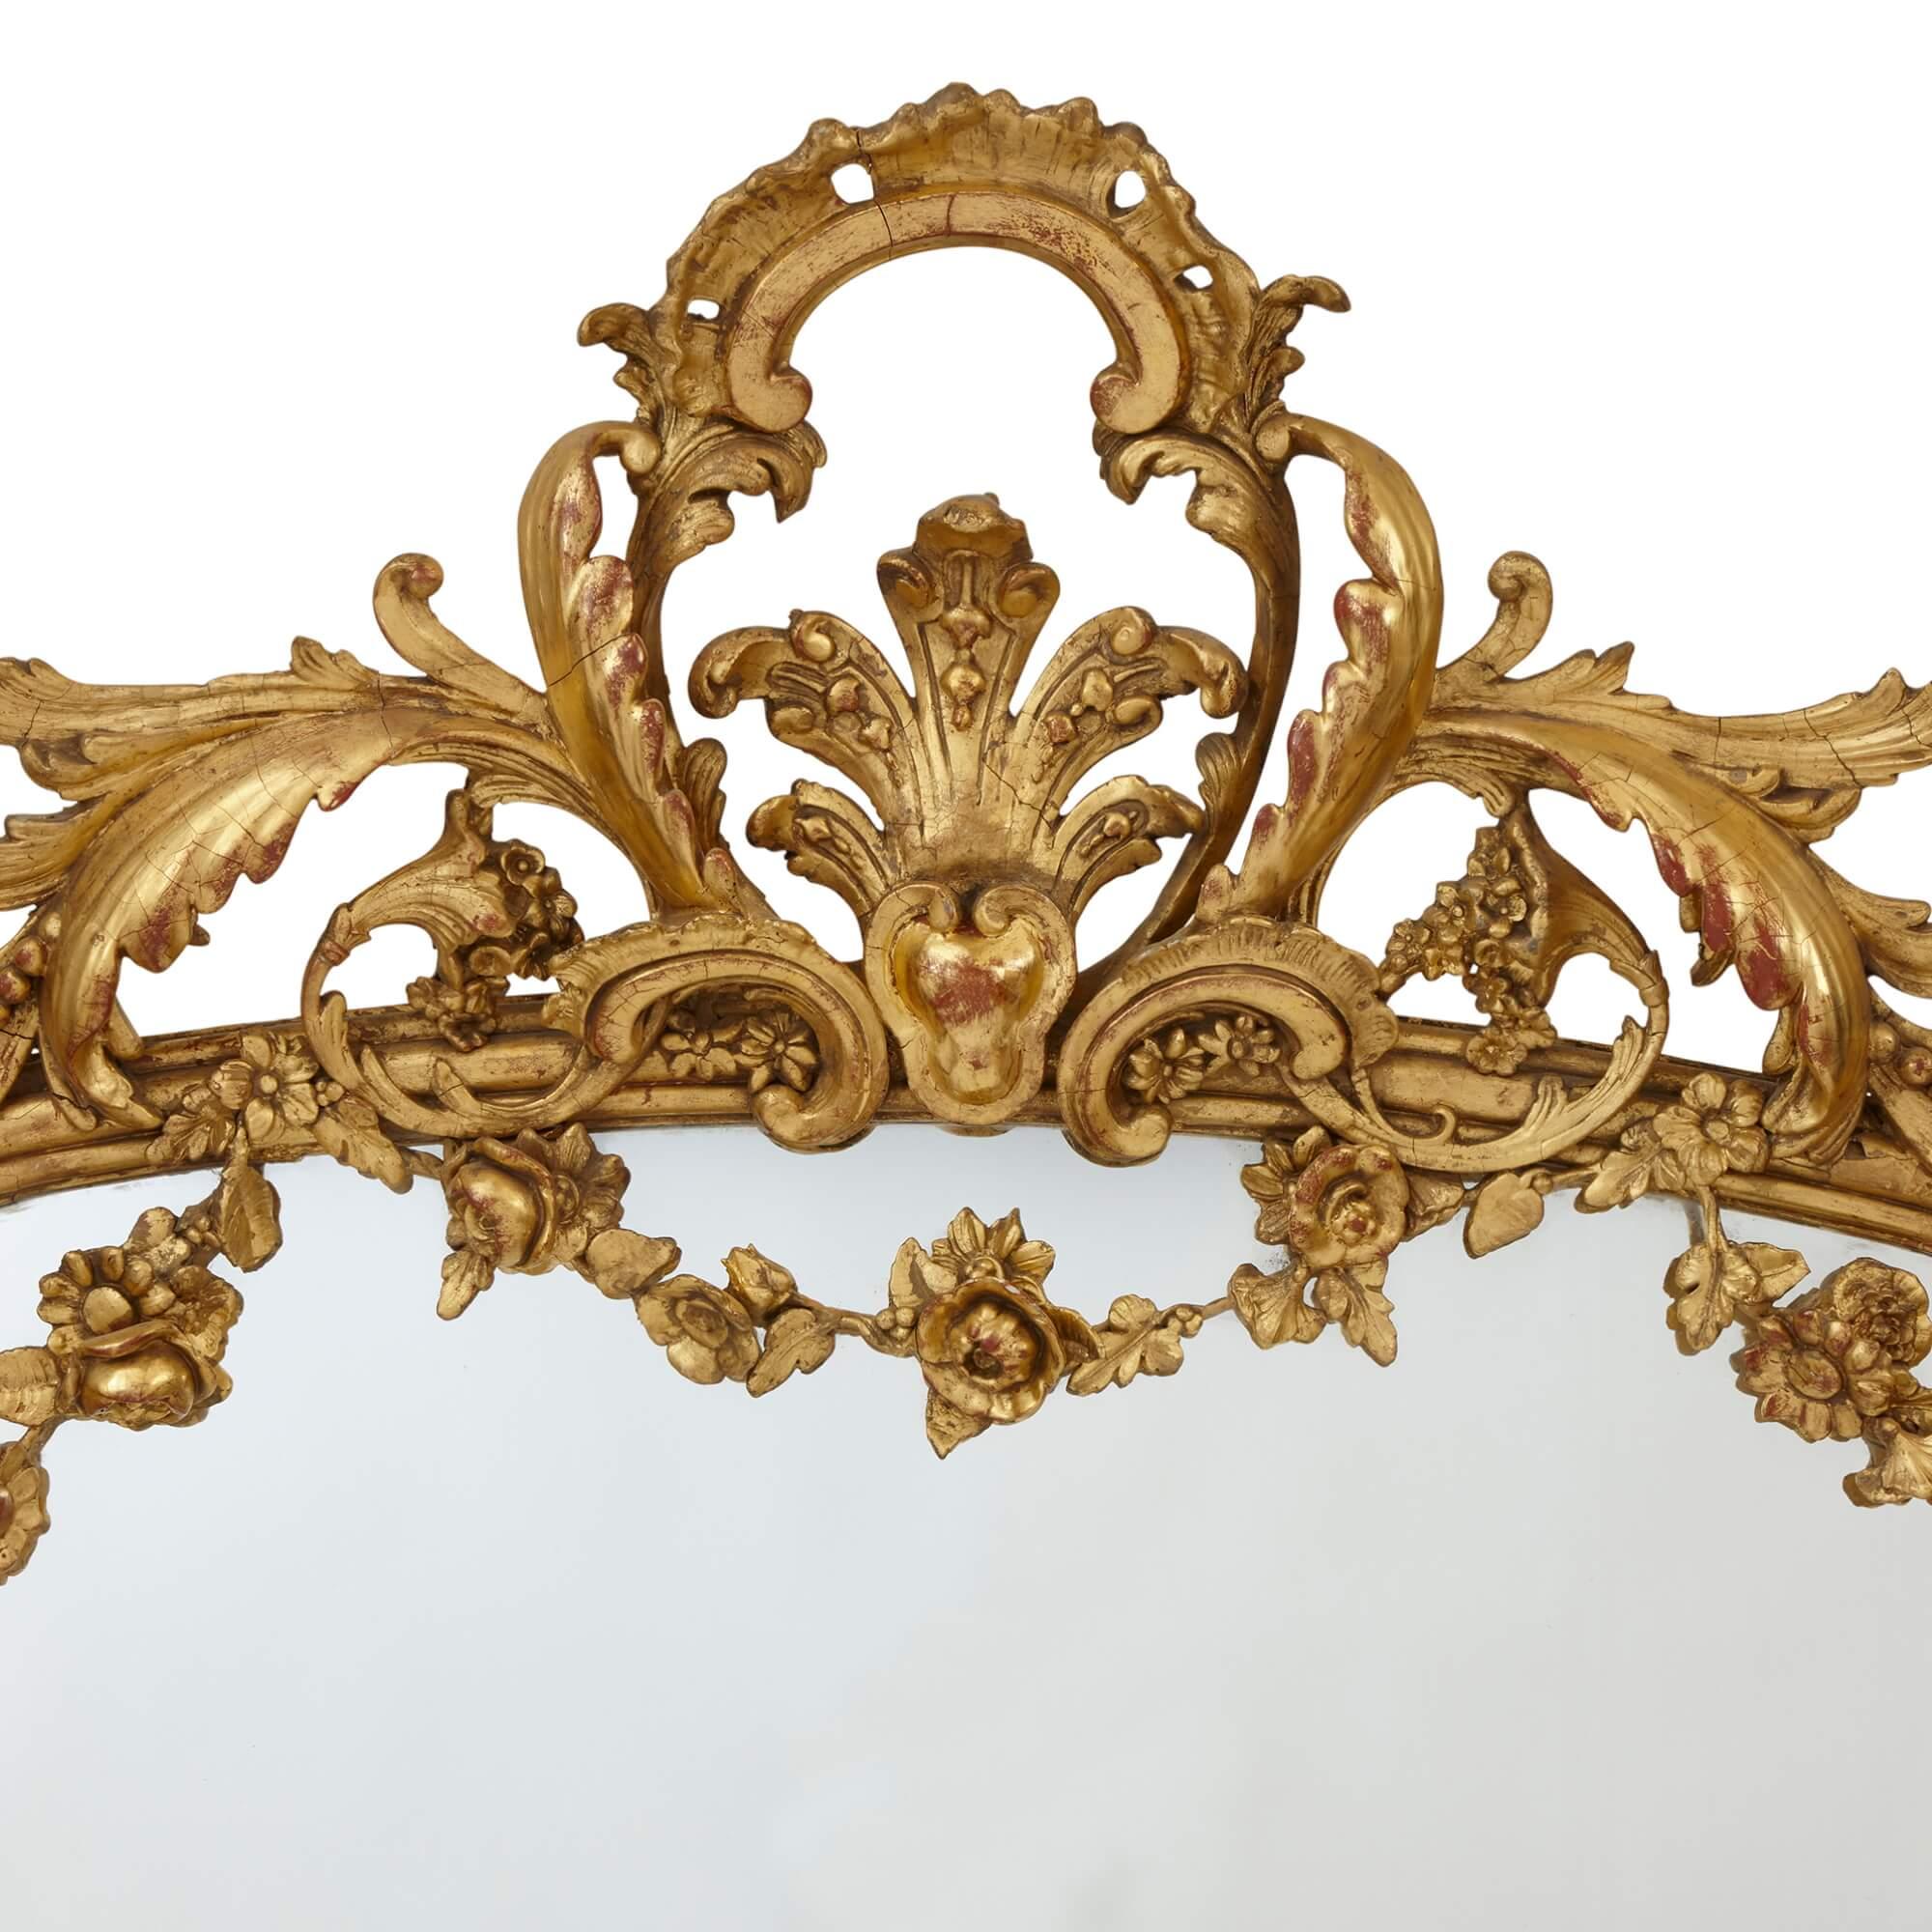 19th Century Pair of Large French Rococo Revival Giltwood Wall Mirrors For Sale